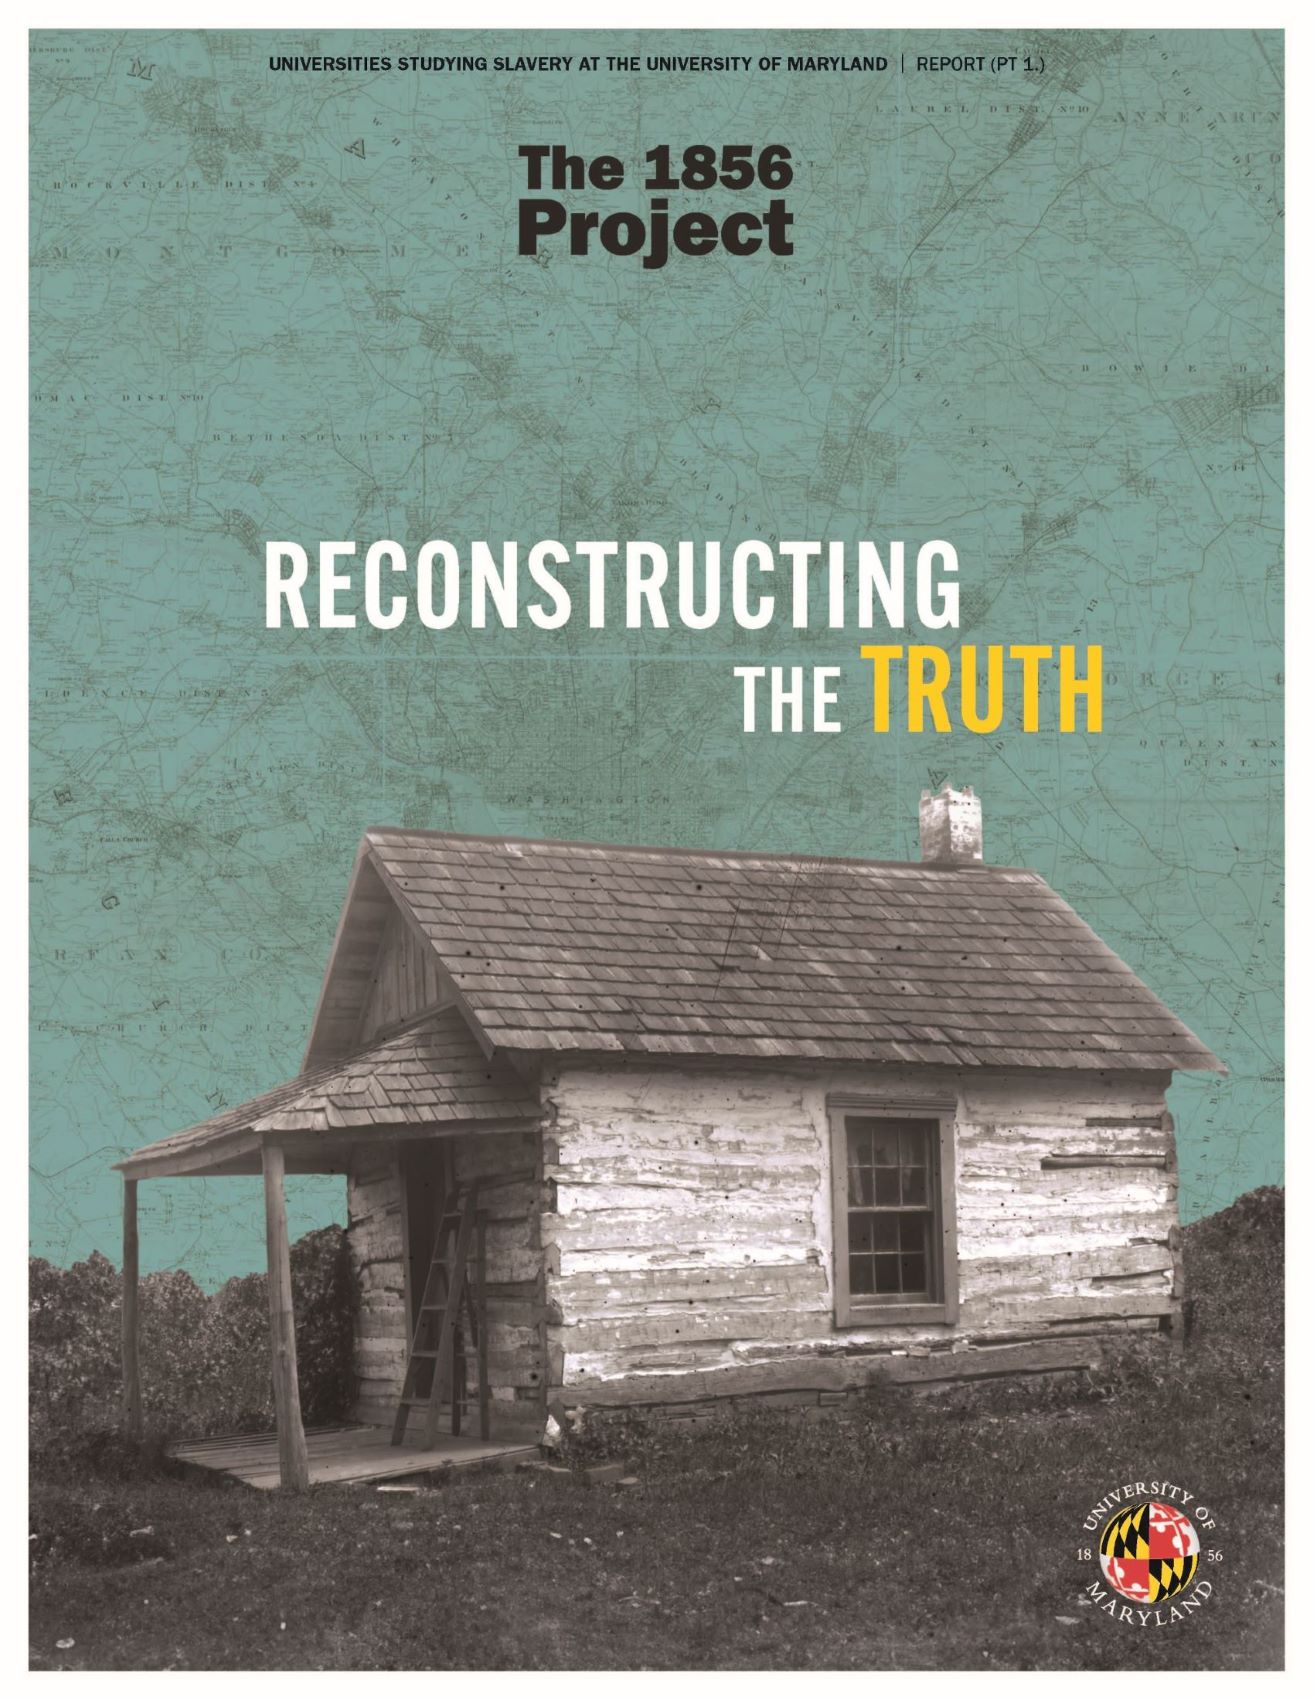 cover of The 1856 Project research report, titled "Reconstructing the Truth"; image is a black and white cabin on a green background depicting a map of the DMV